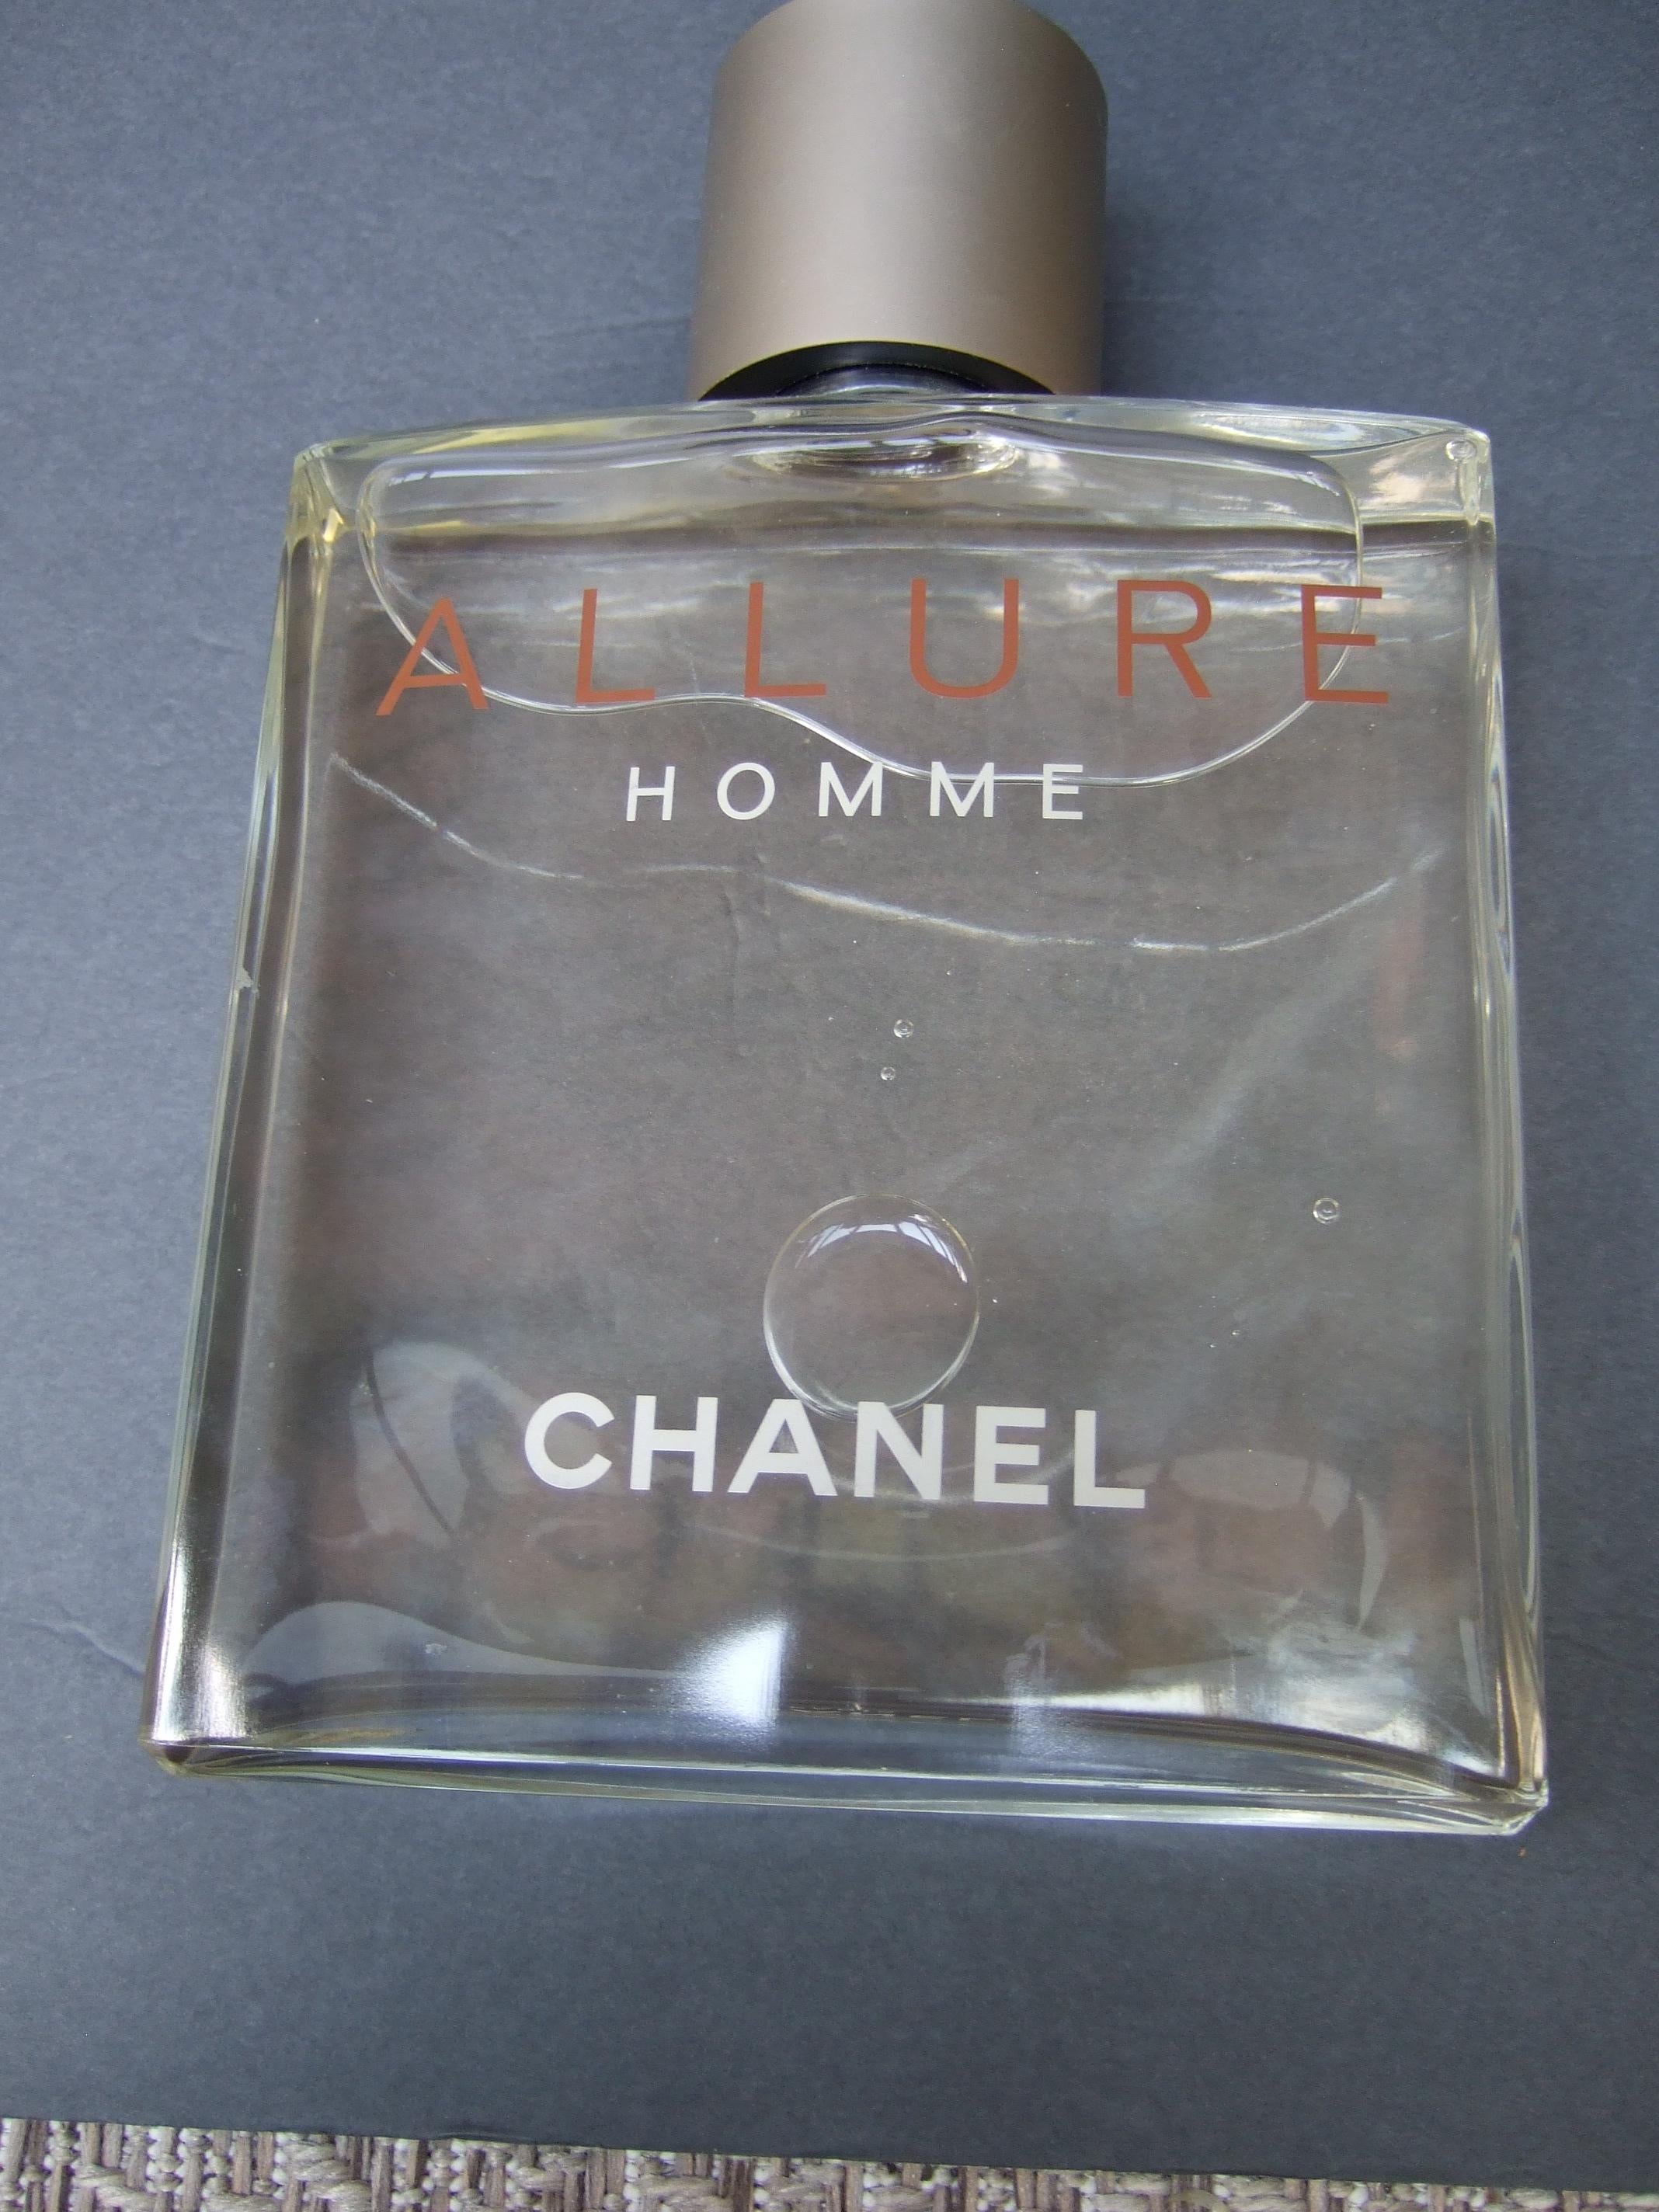 Chanel Allure Homme Huge Glass Factice Dummy Display Bottle  21st c  In Good Condition For Sale In University City, MO